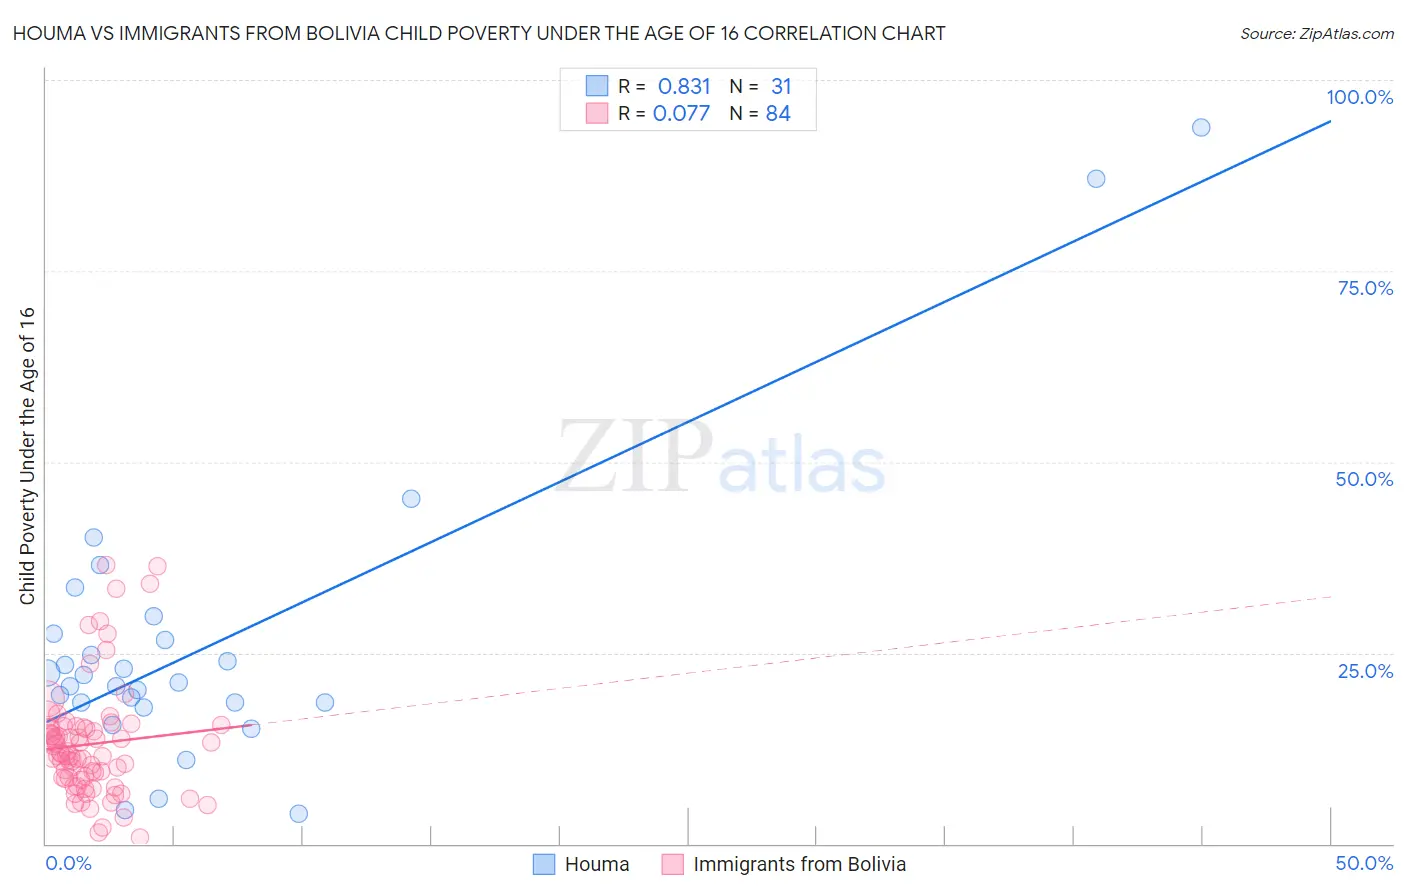 Houma vs Immigrants from Bolivia Child Poverty Under the Age of 16